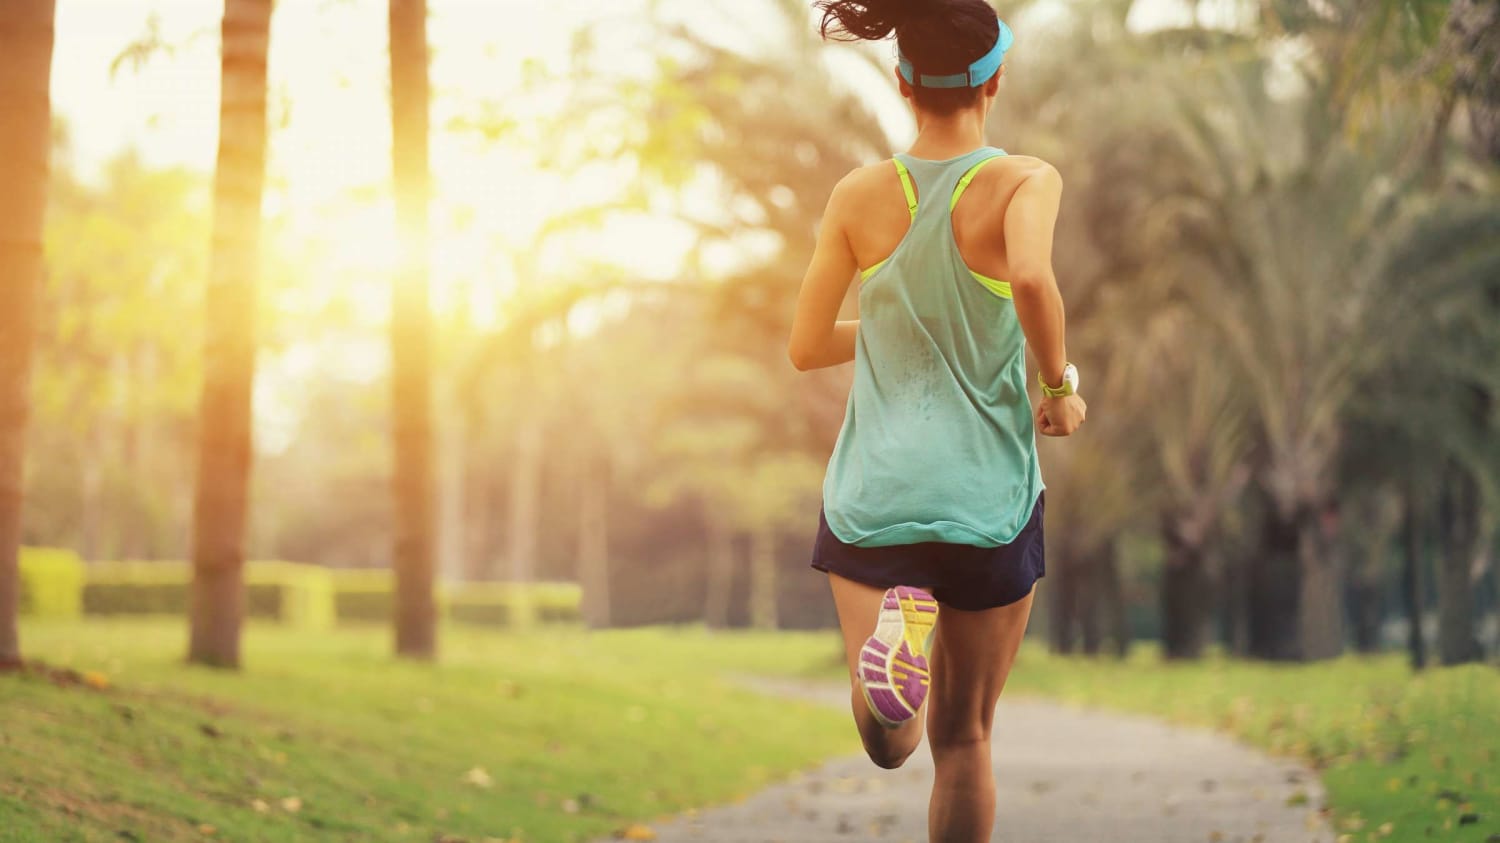 Running Just Once a Week Is Linked to a 27 Percent Drop in Risk of Early Death